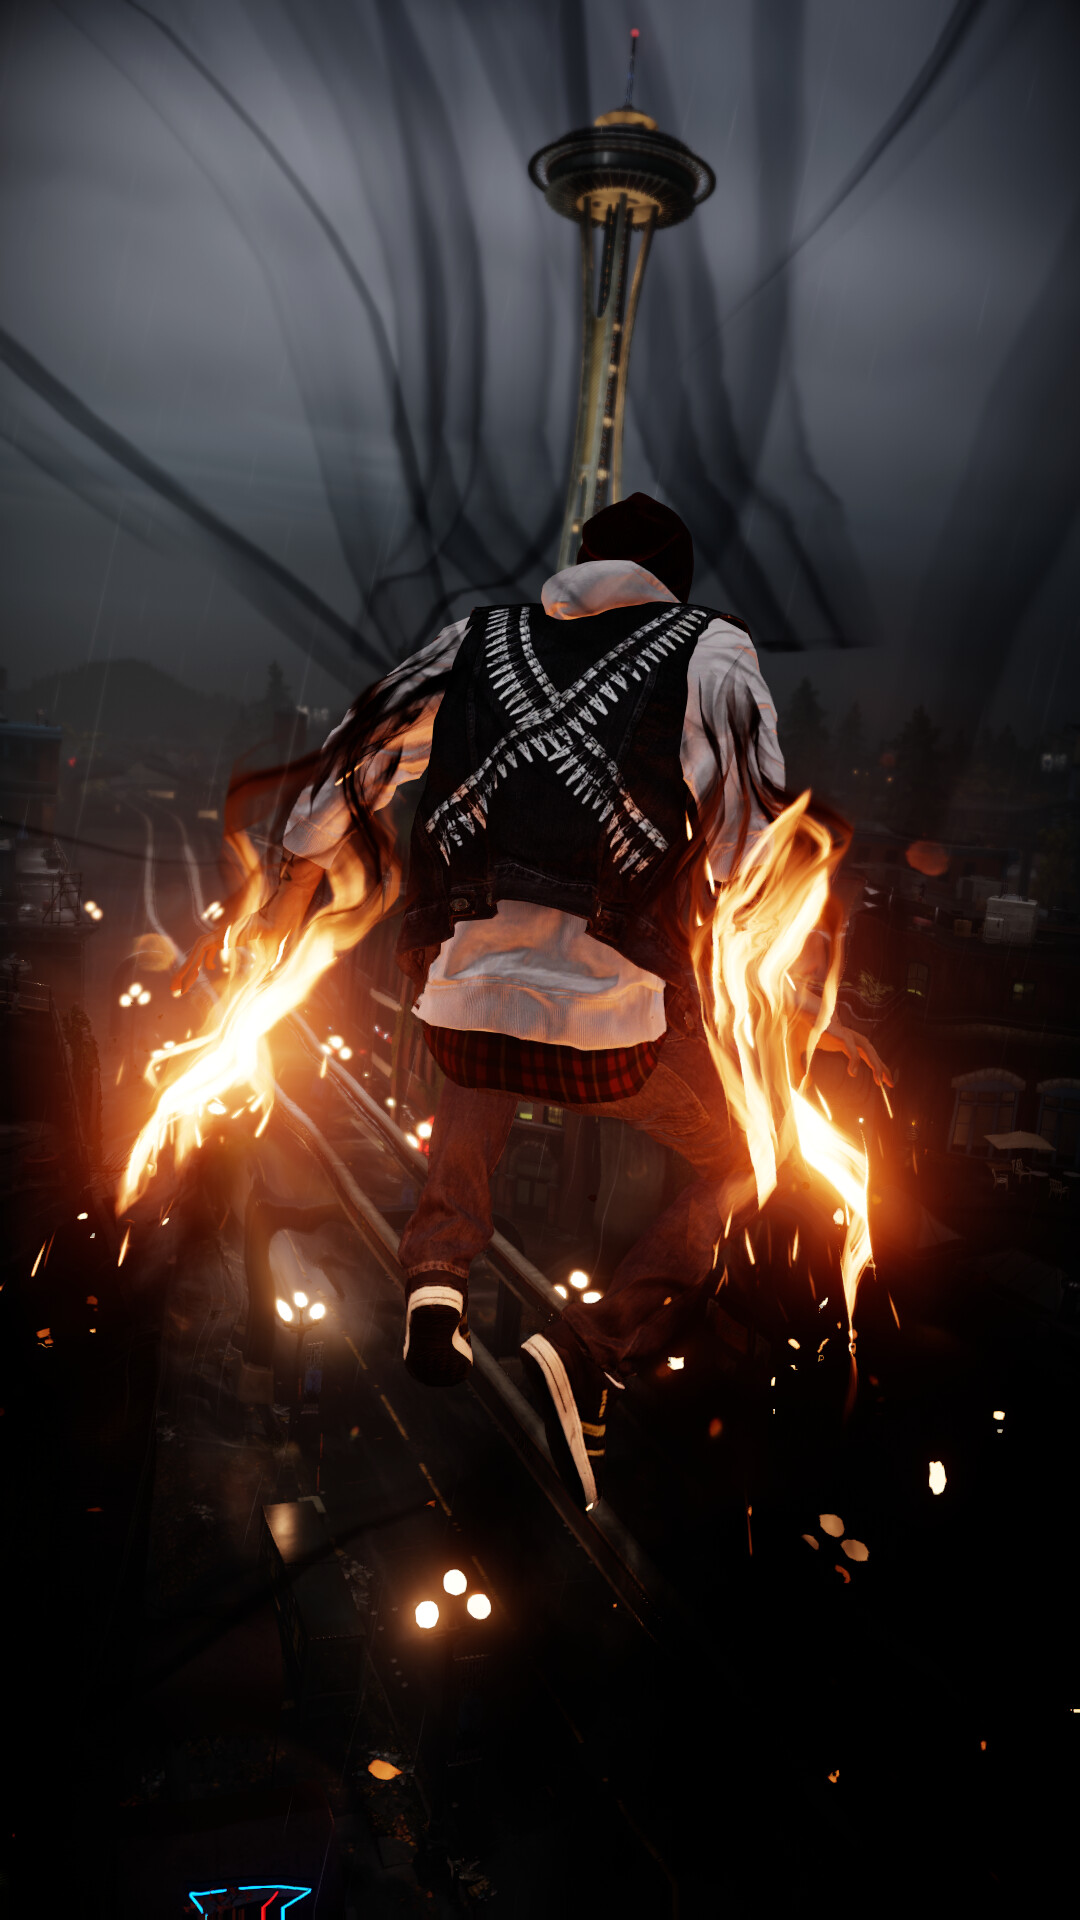 inFAMOUS: One of the best-selling PlayStation 4 games, Developed by Sucker Punch Productions. 1080x1920 Full HD Background.